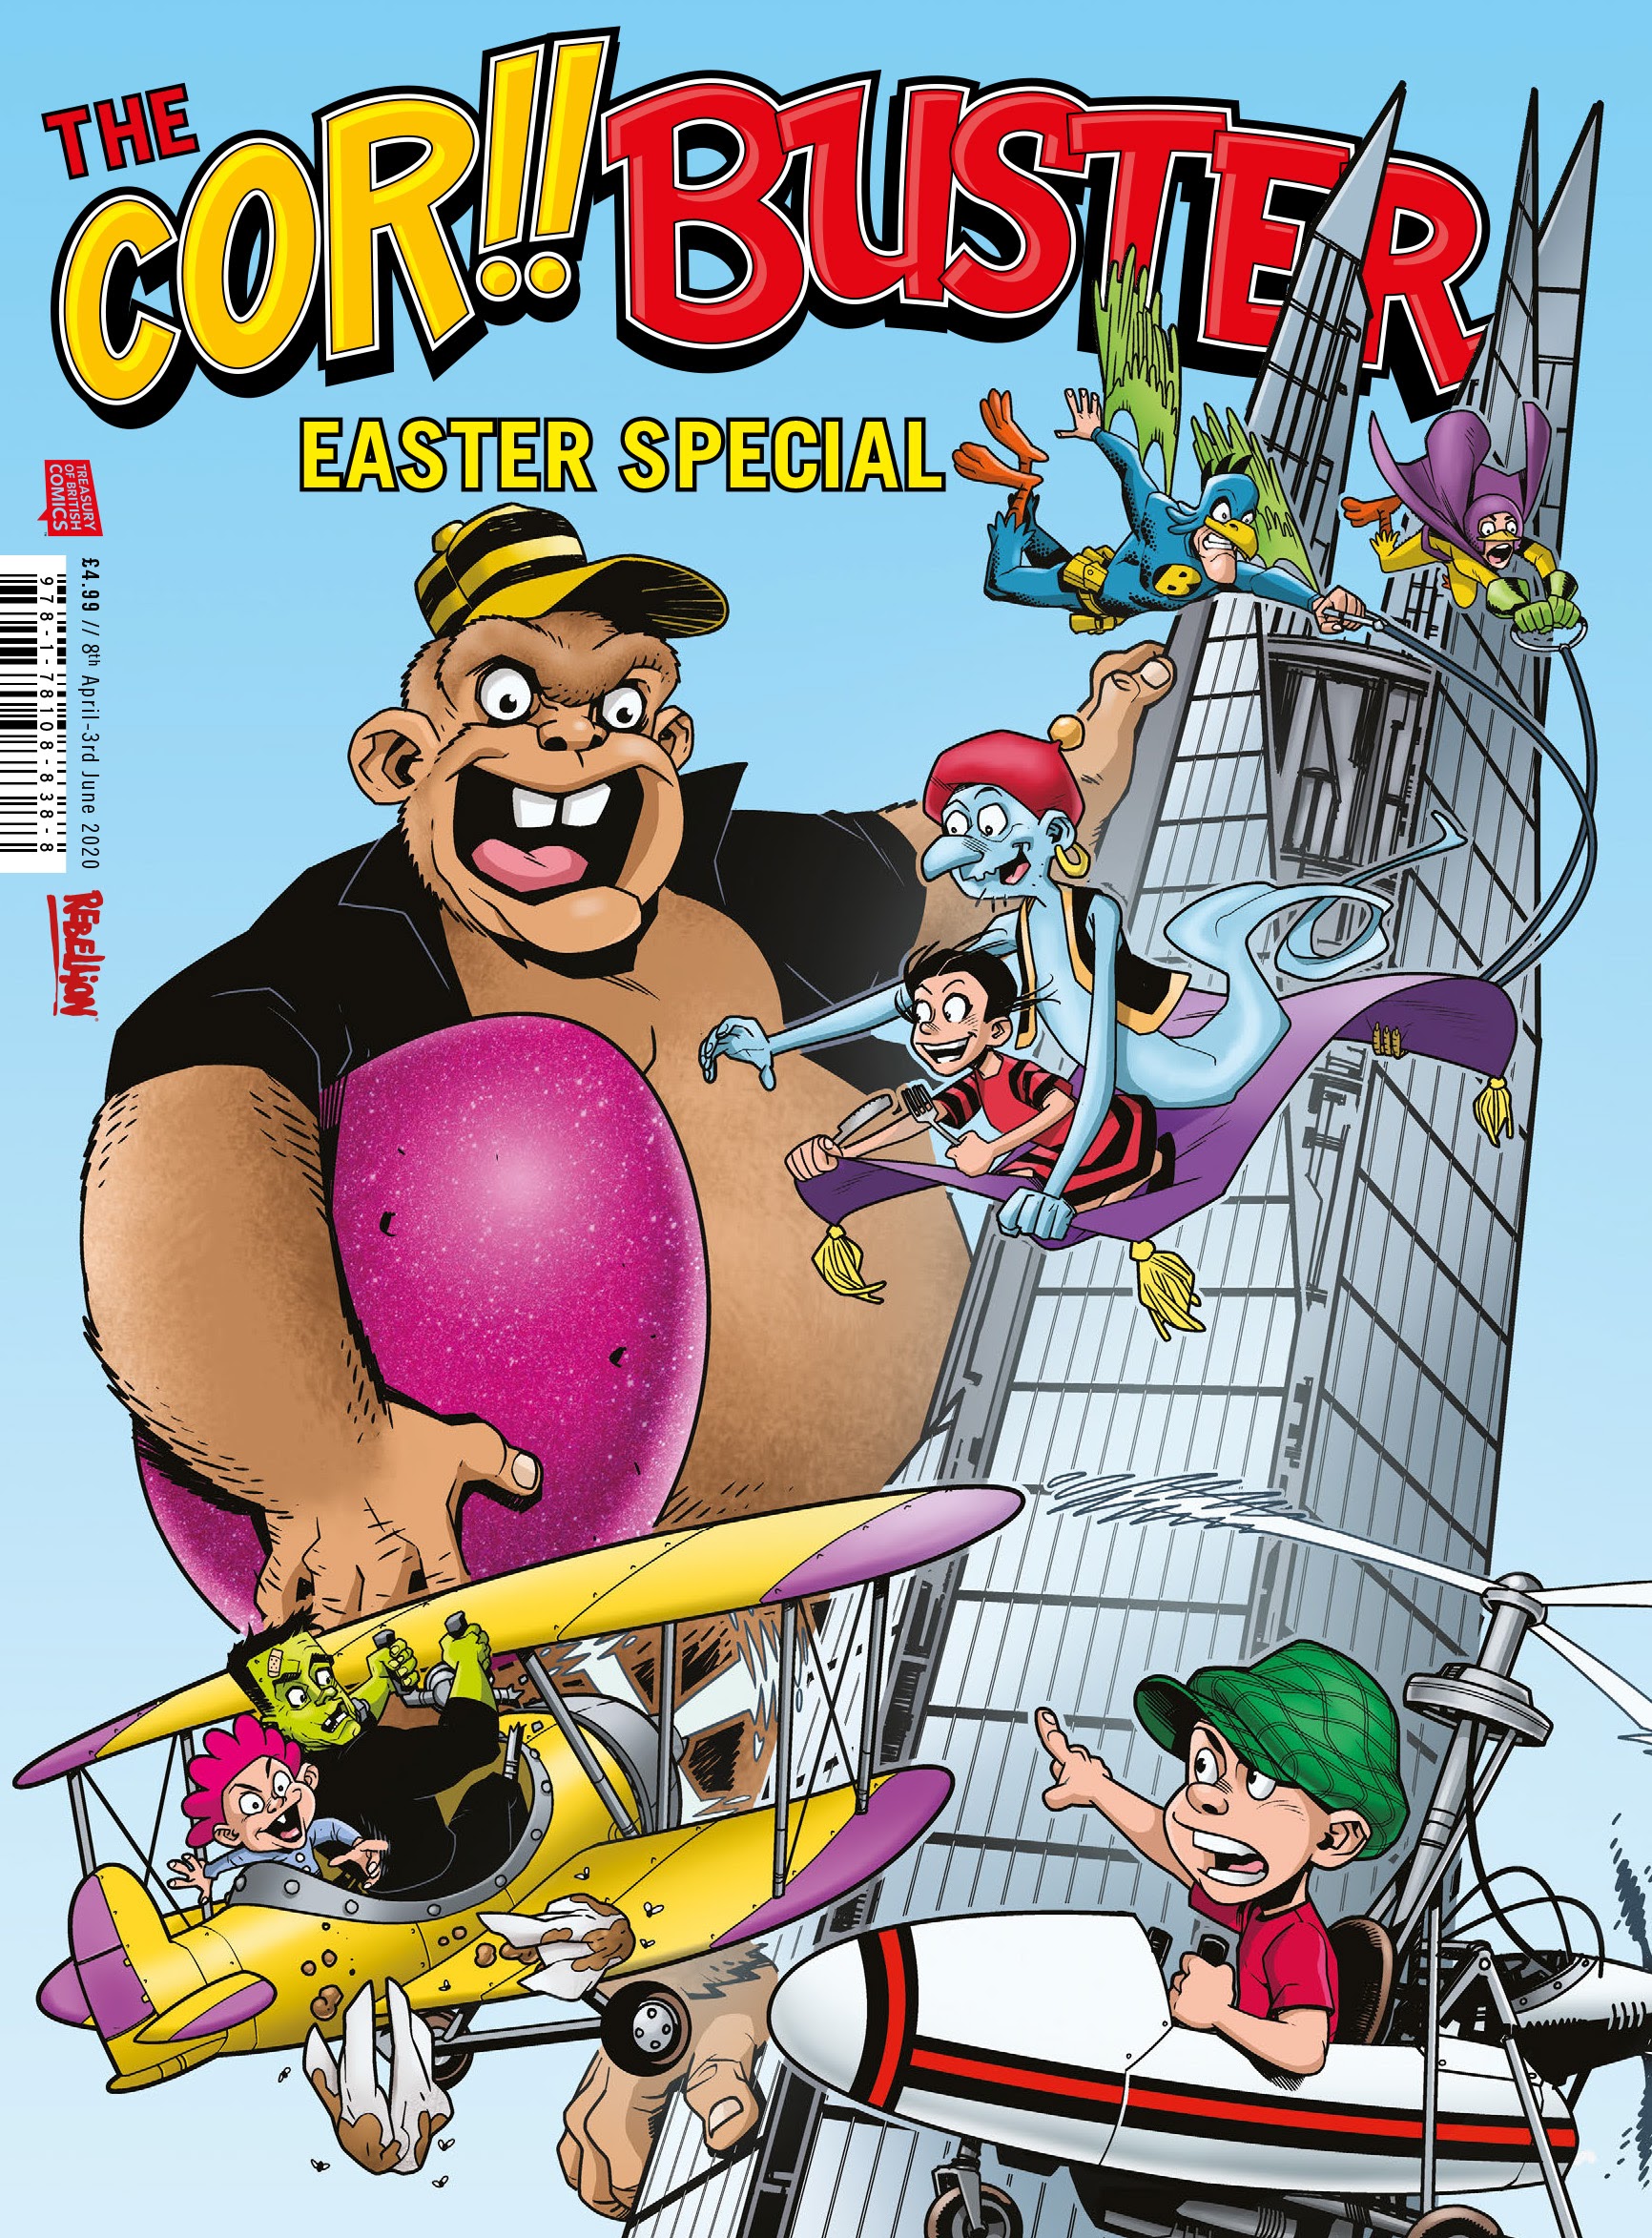 Read online The Cor!! Buster Easter Special comic -  Issue # Full - 1